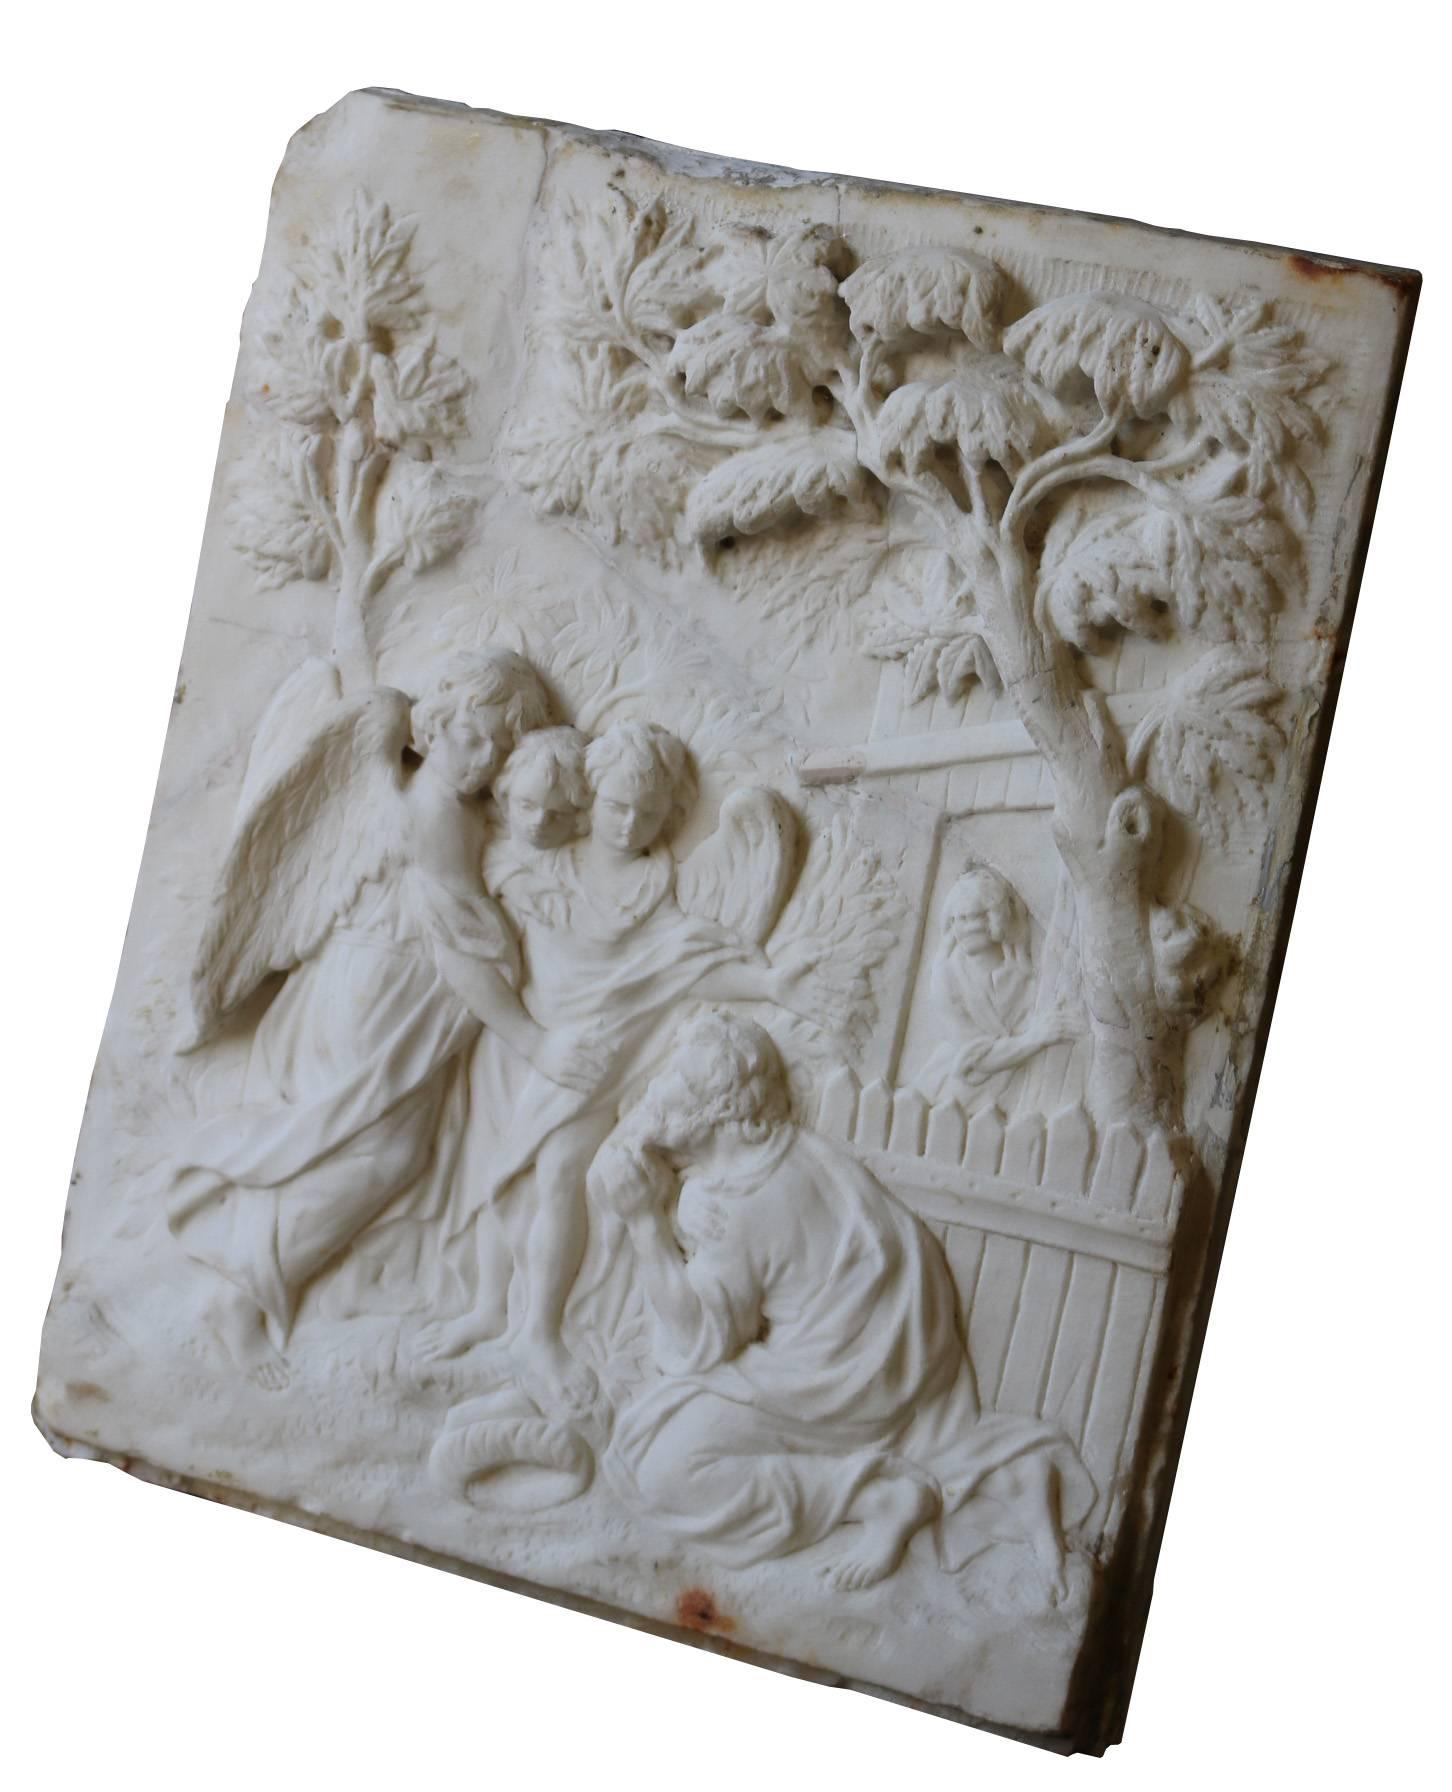 This plaque is deeply carved and has been backed on to stone. There have been some repairs which have been done well and can be seen in the images.
The depth listed is approximate.
Weight 20 kg